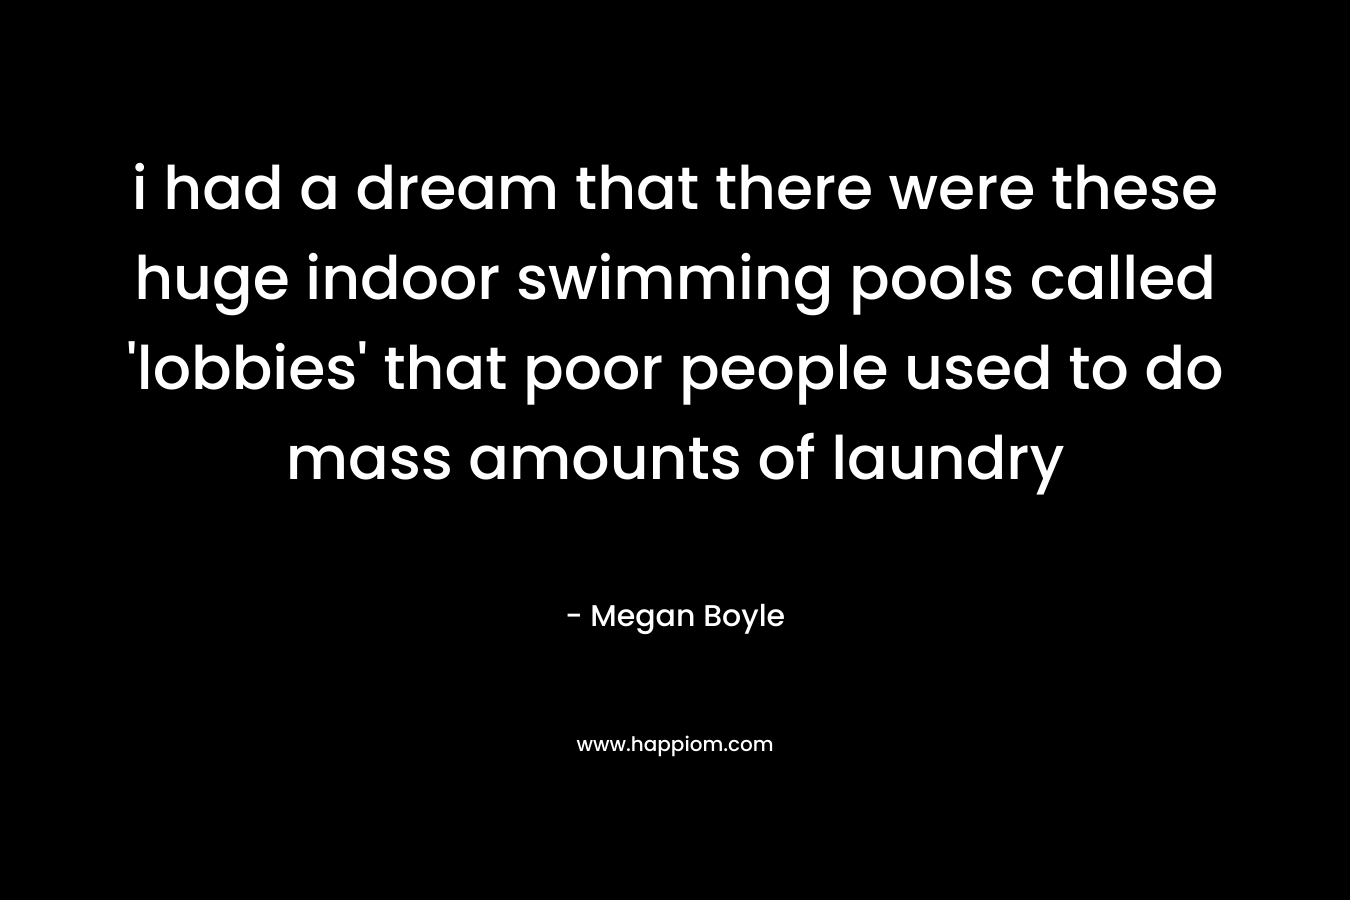 i had a dream that there were these huge indoor swimming pools called ‘lobbies’ that poor people used to do mass amounts of laundry – Megan Boyle